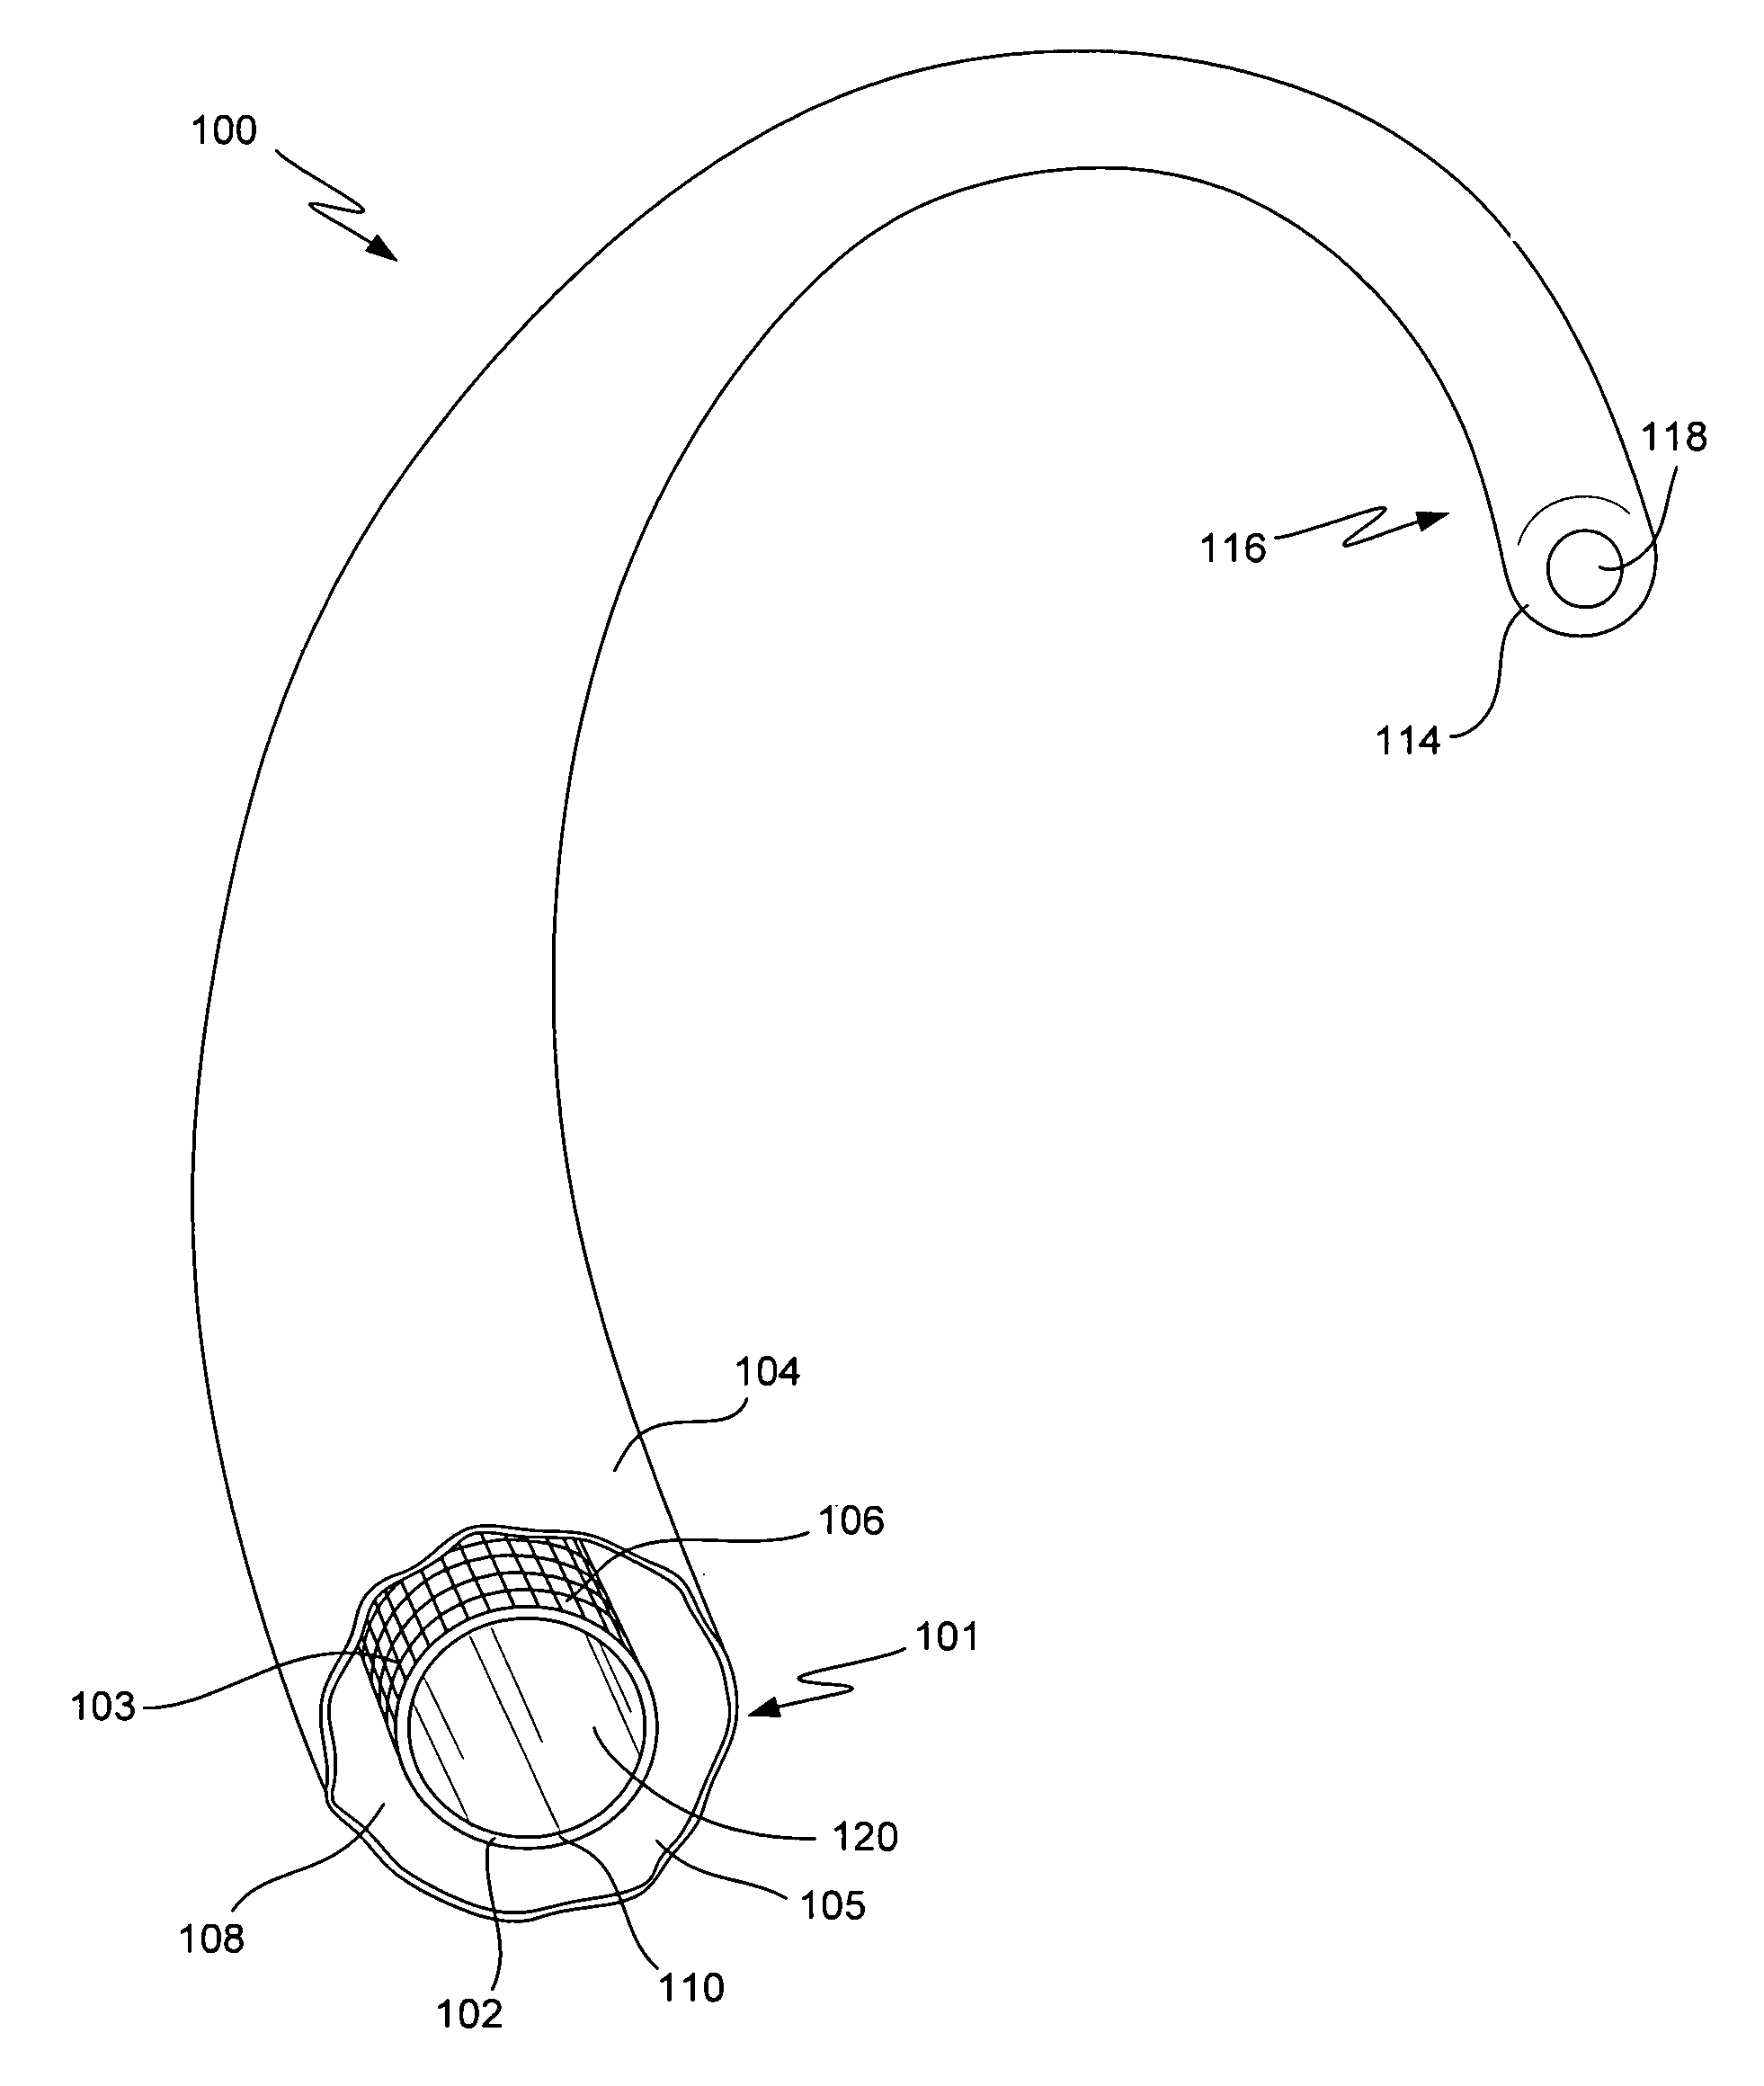 Selectively rigidizable and actively steerable articulatable device